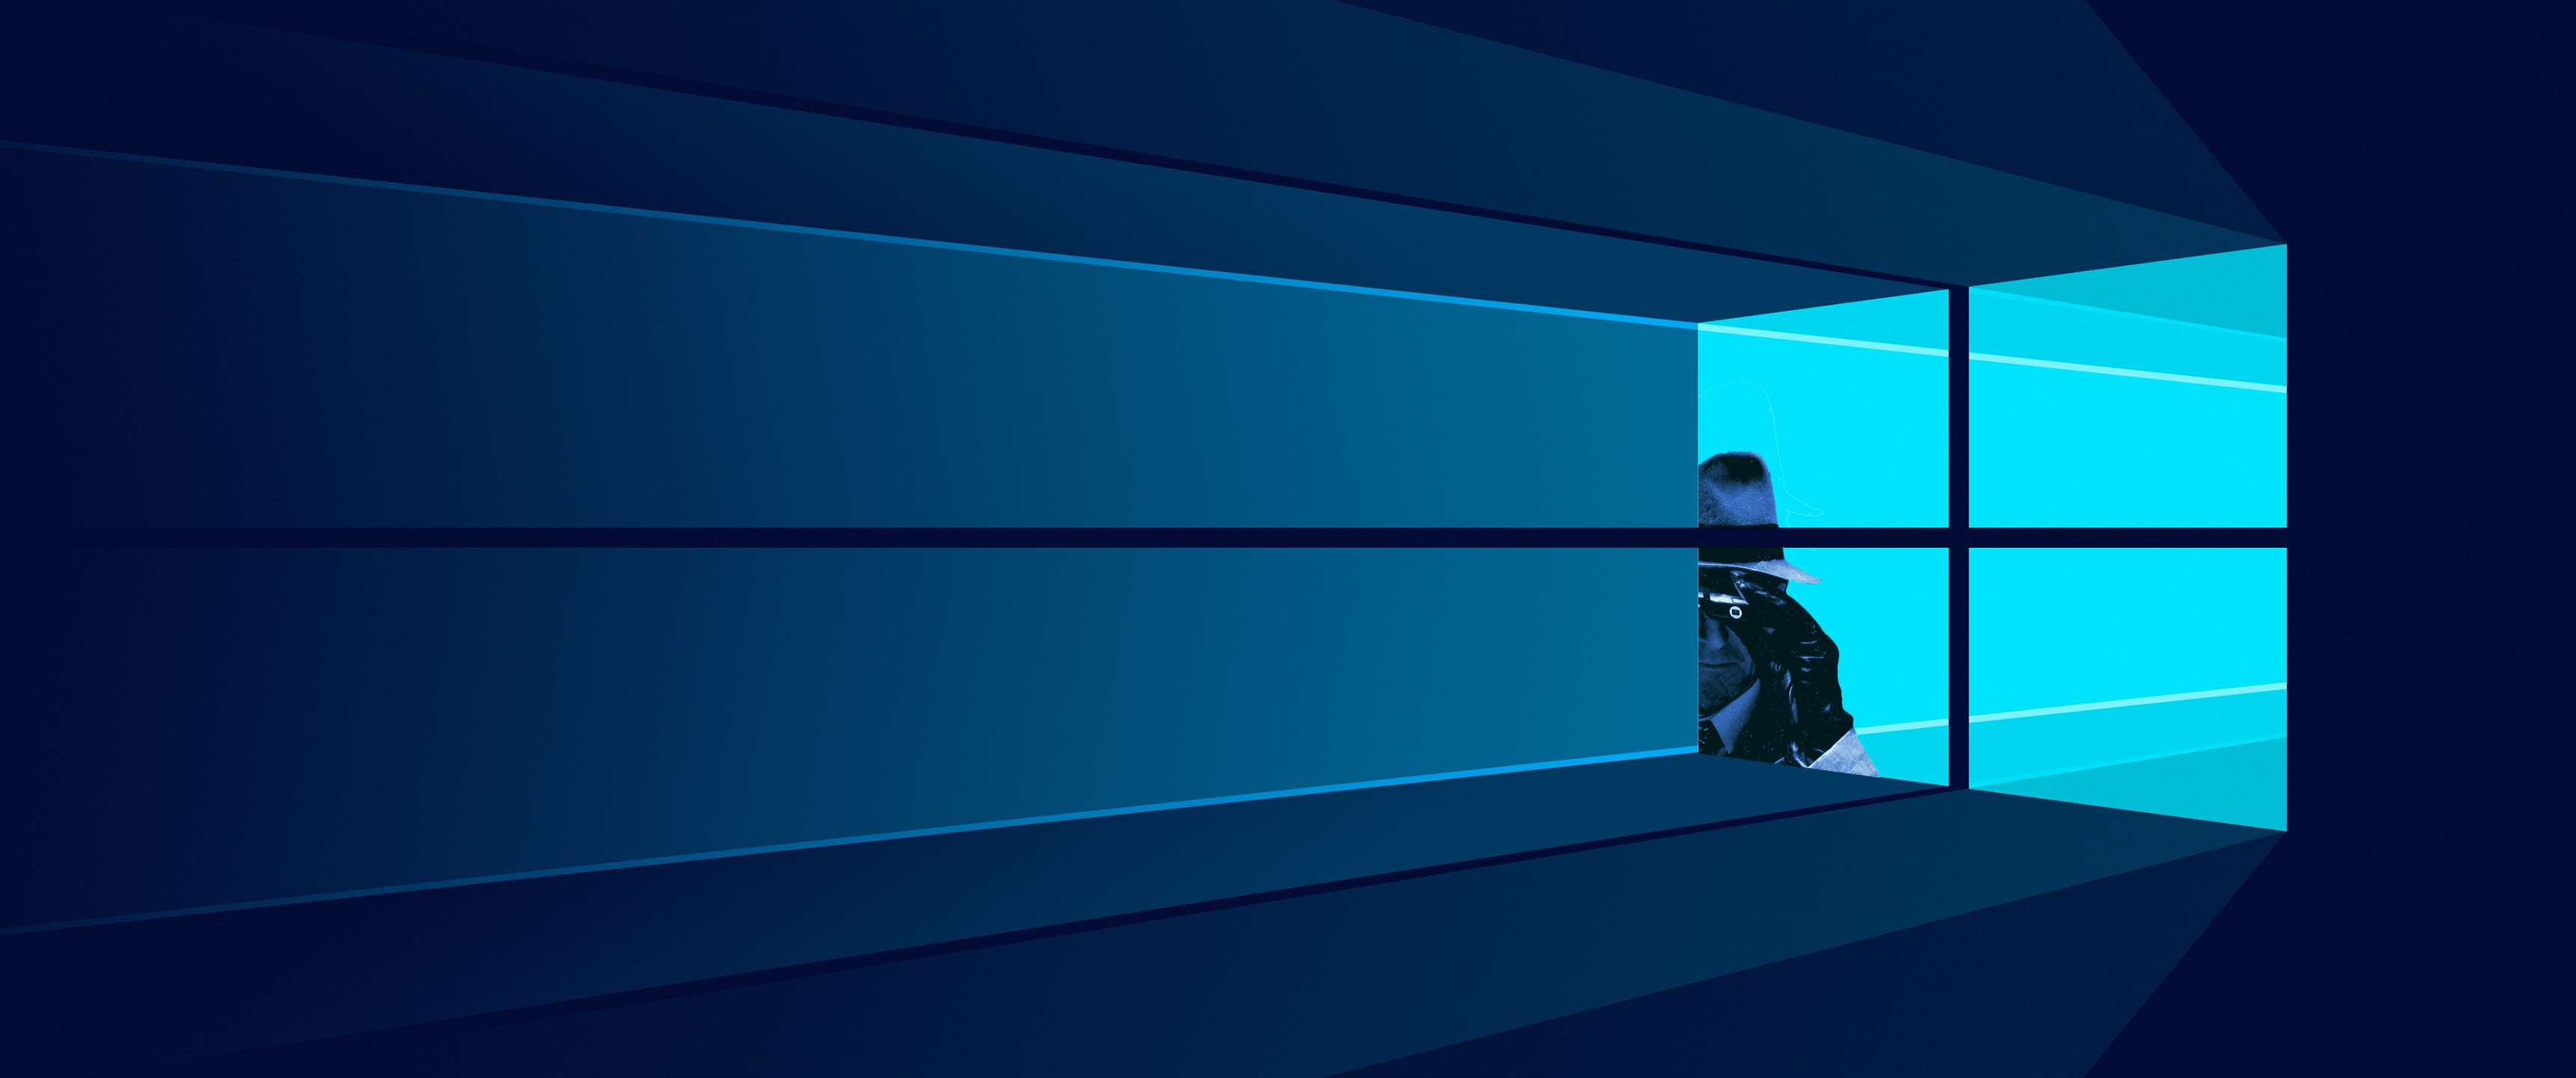 A man standing in front of an open window - 3440x1440